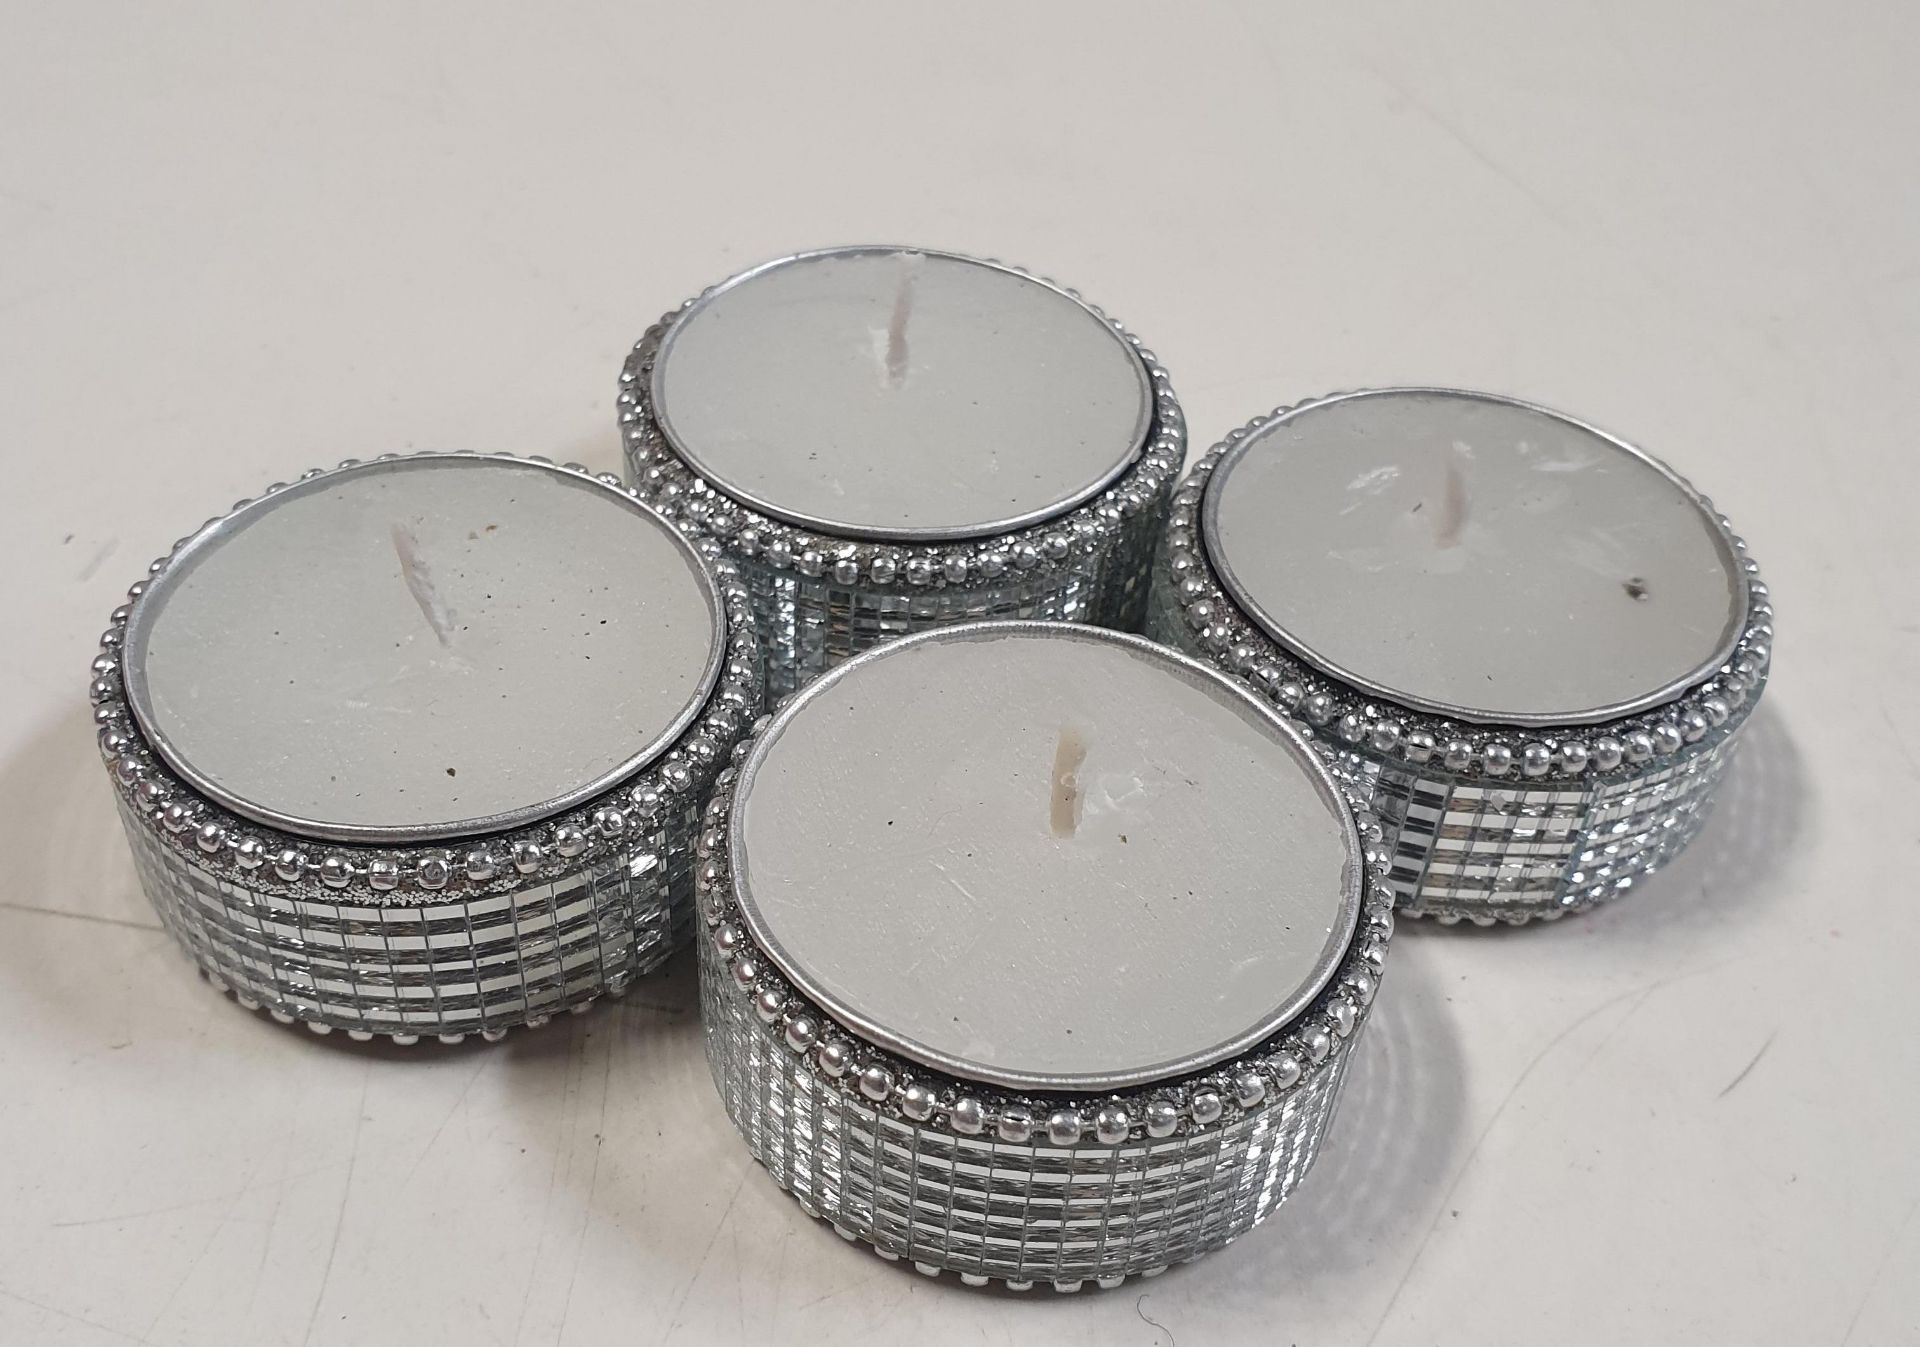 24 x Candles and Tealight Holders.